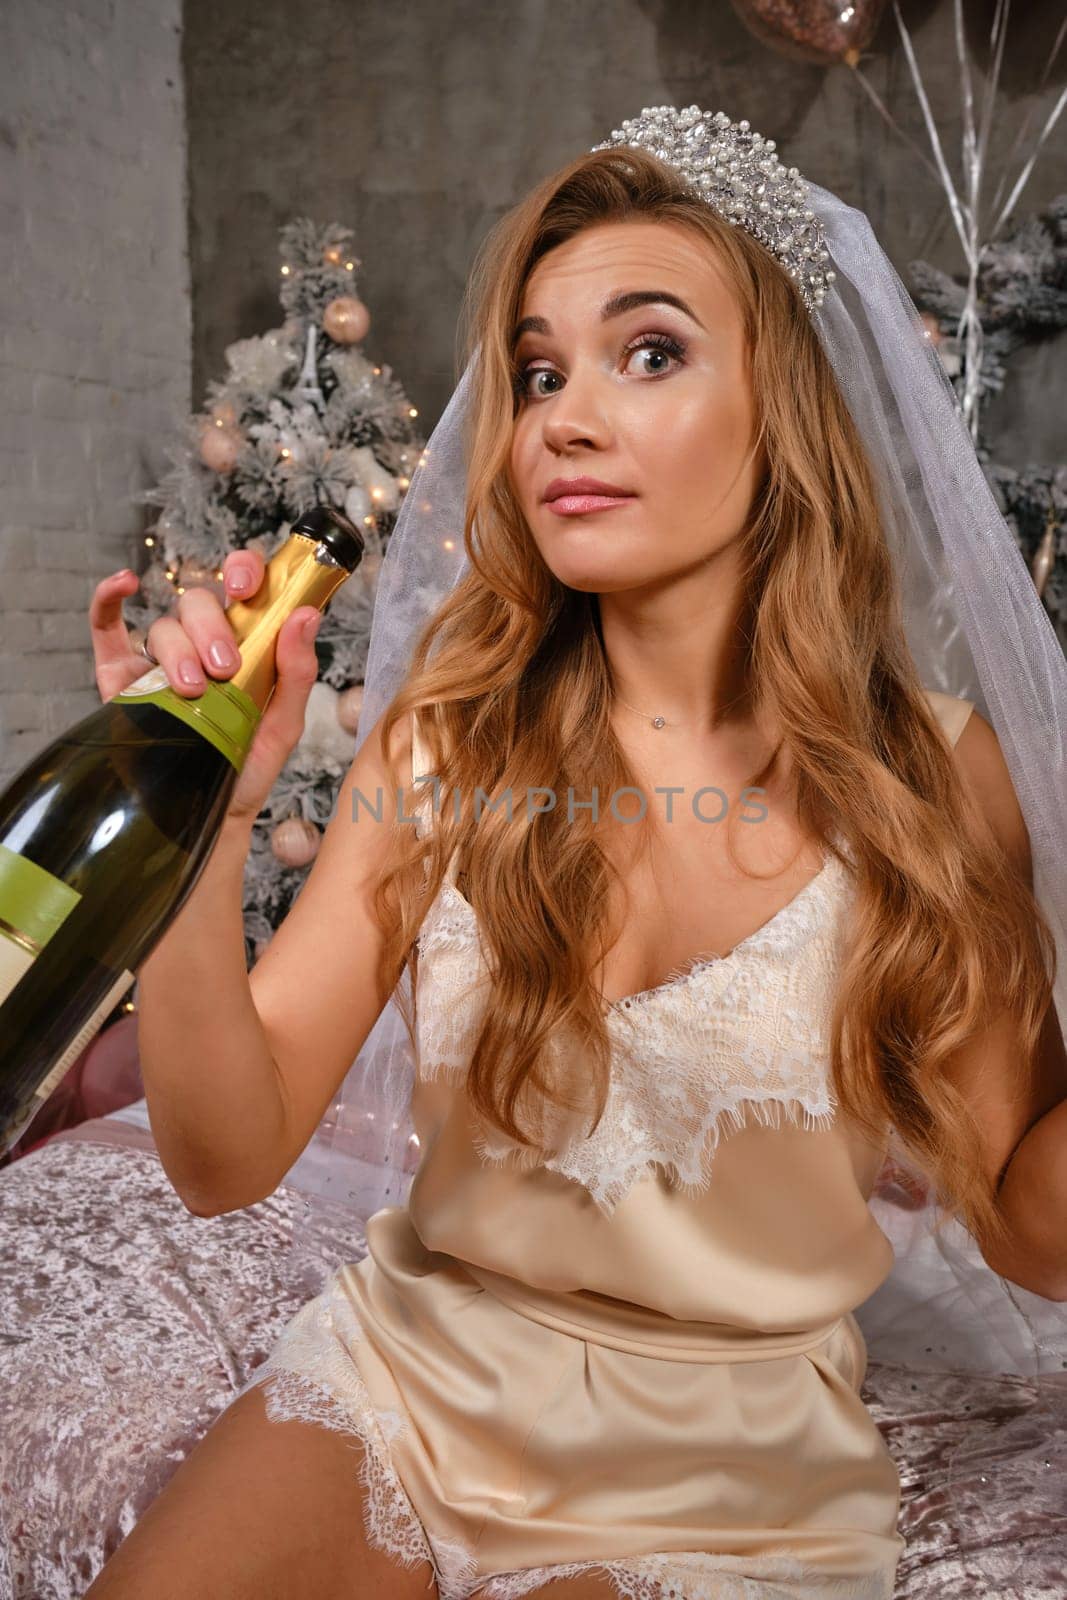 Gorgeous blonde lady in lacy beige lingerie, white veil and tiara is enjoying hen-party of bride, sitting on bed and drinking champagne. Christmas tree, decorations, balloons. Fashion. Close-up.